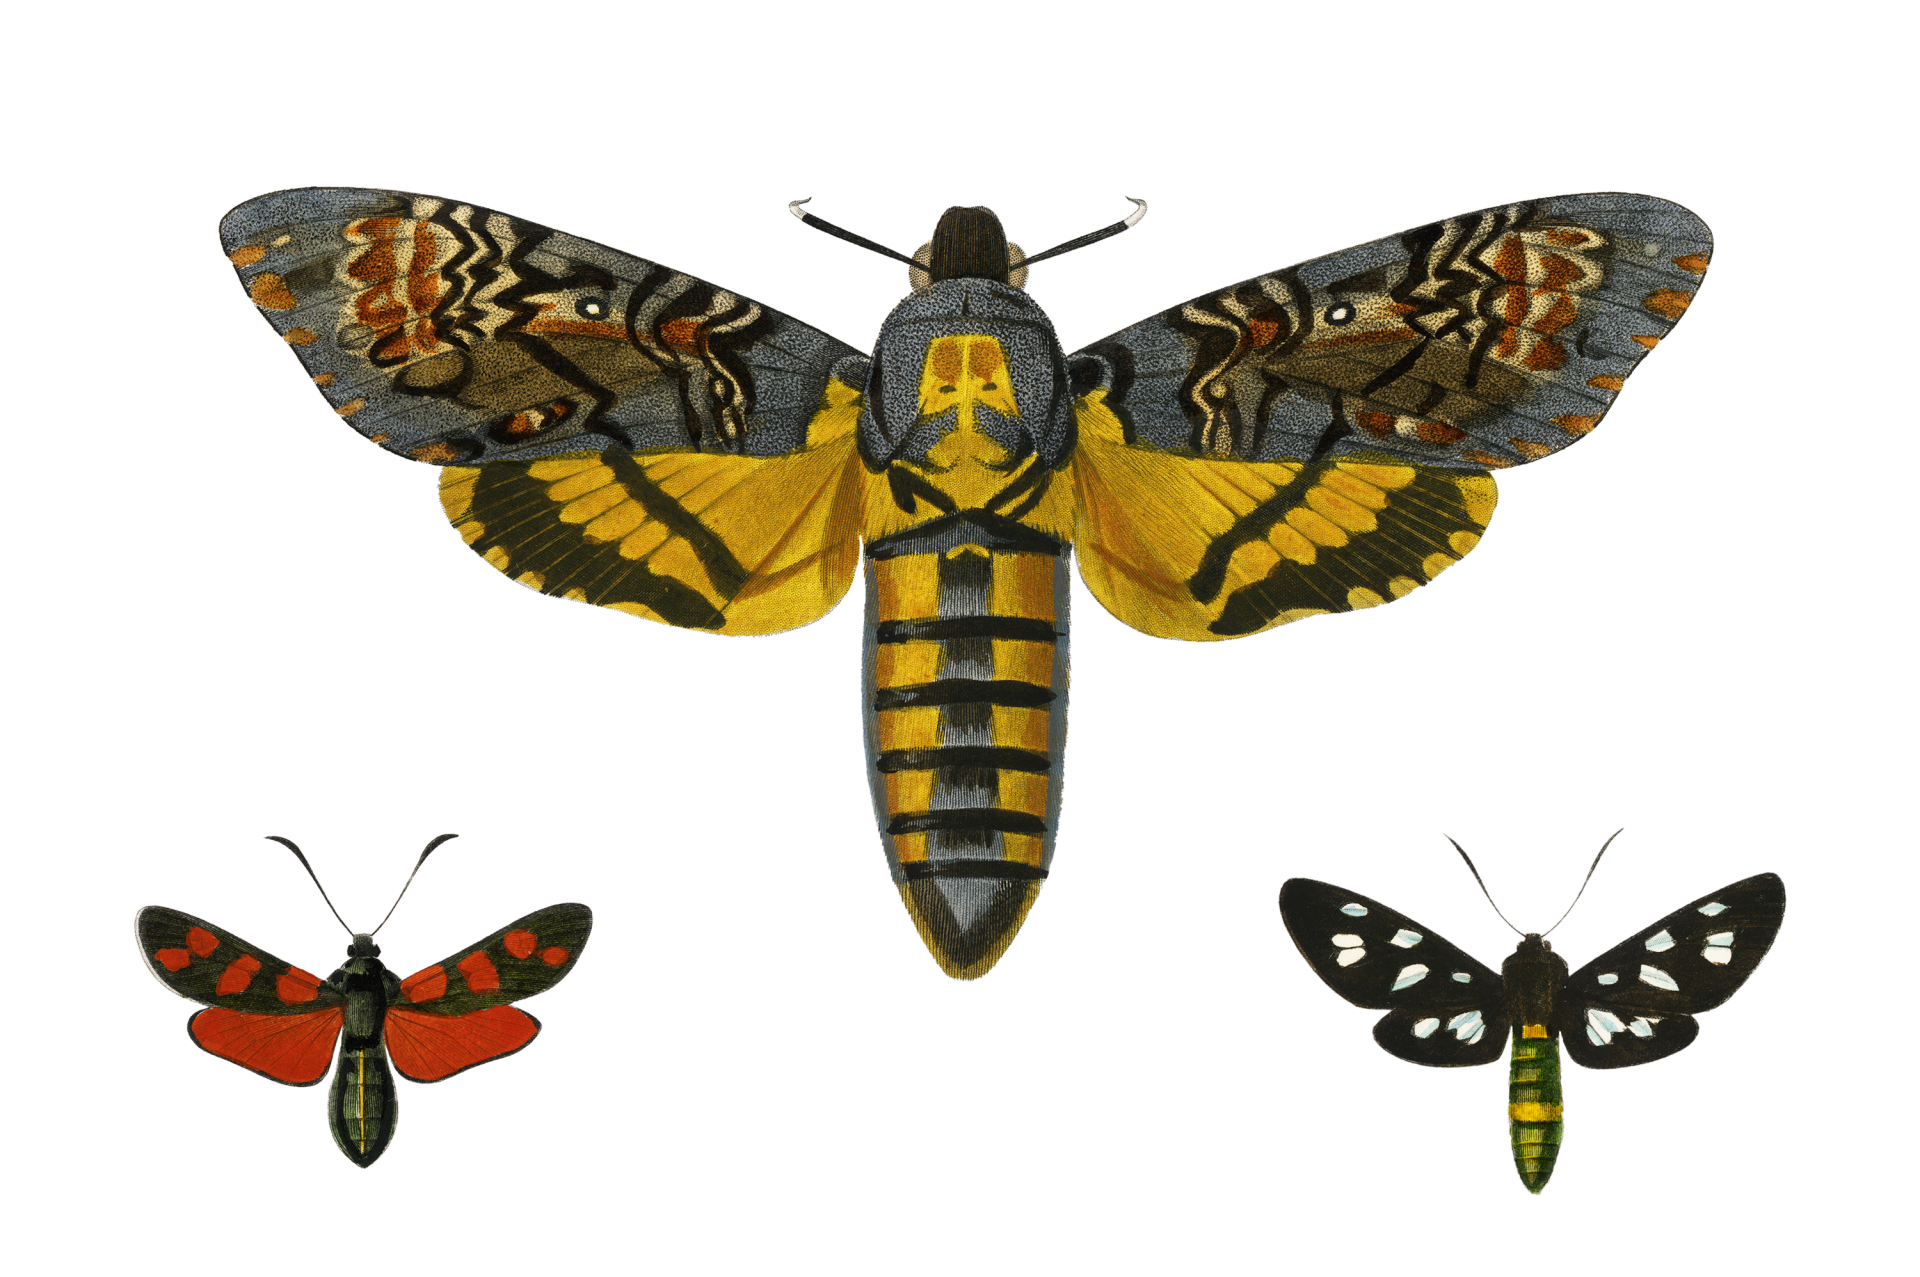 Moth hawk butterfly moth insect clipart with transparent background image element cut out from old public domain illustration from 19th century vintage stickers